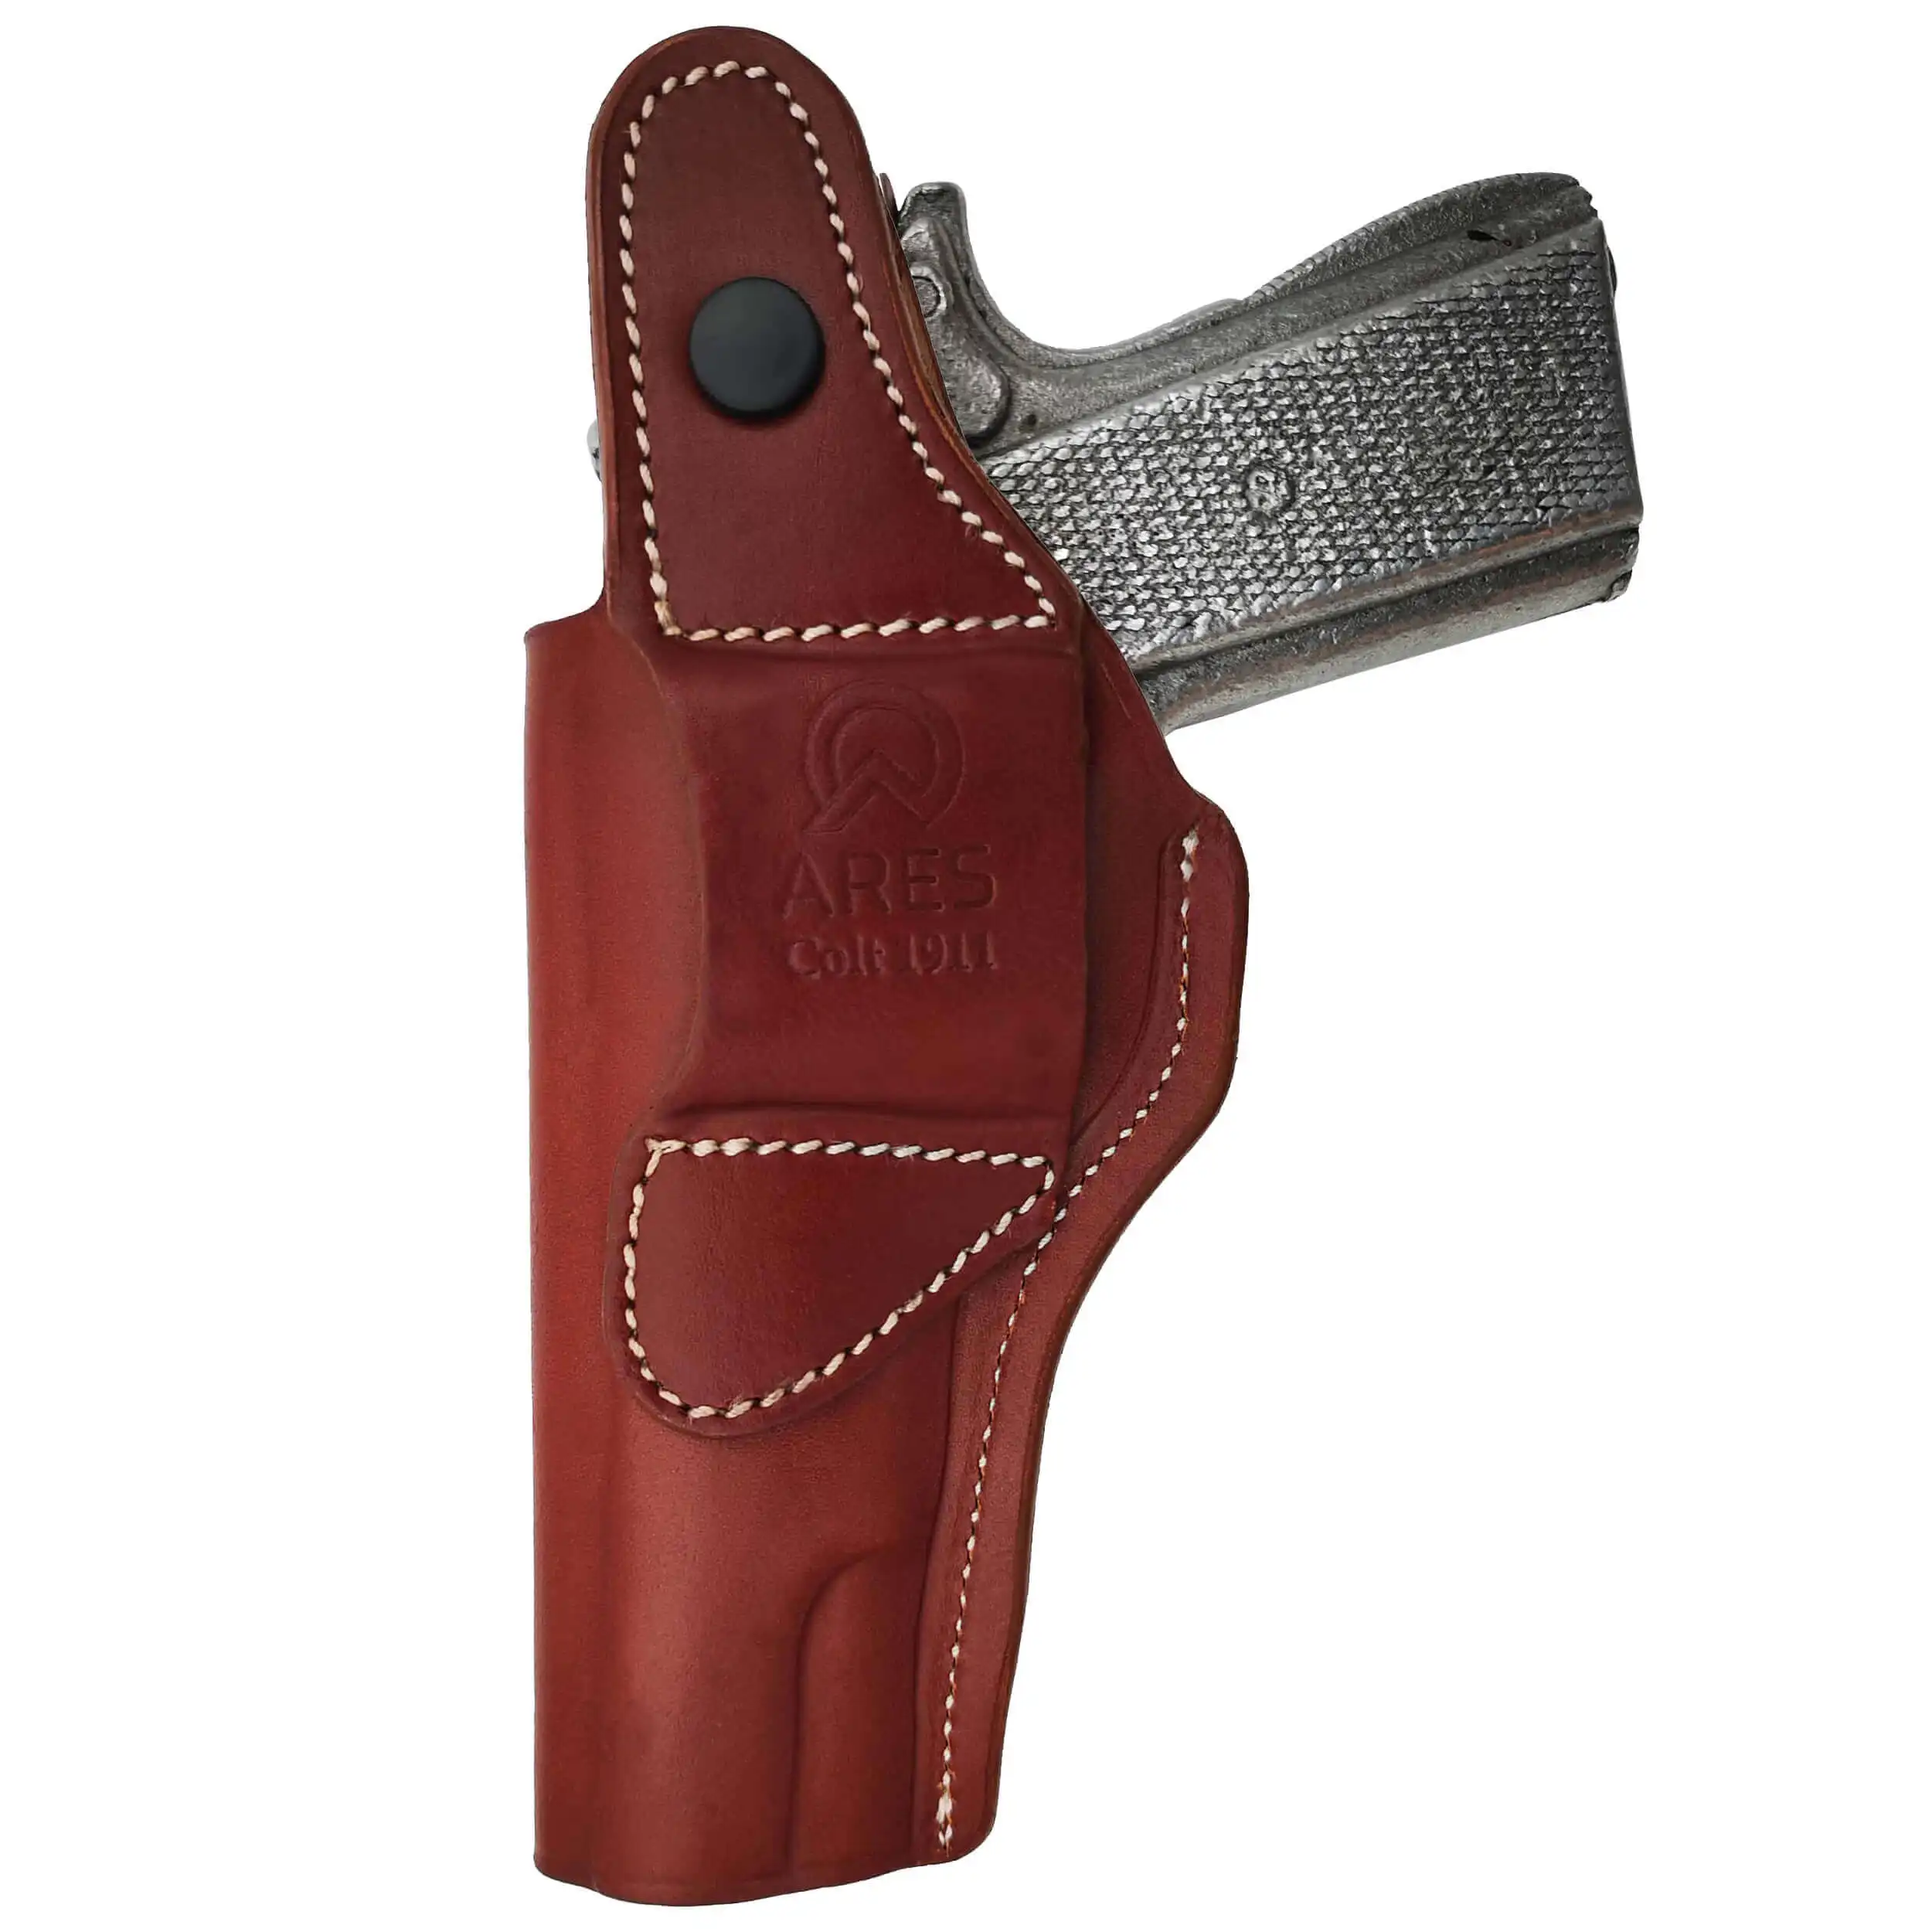 

Browning FN1910 Compatible Real Leather Holster With Carrying Clip Concealed Carry Thumb Release IWB/OWB Strap Gun Pouch Brown